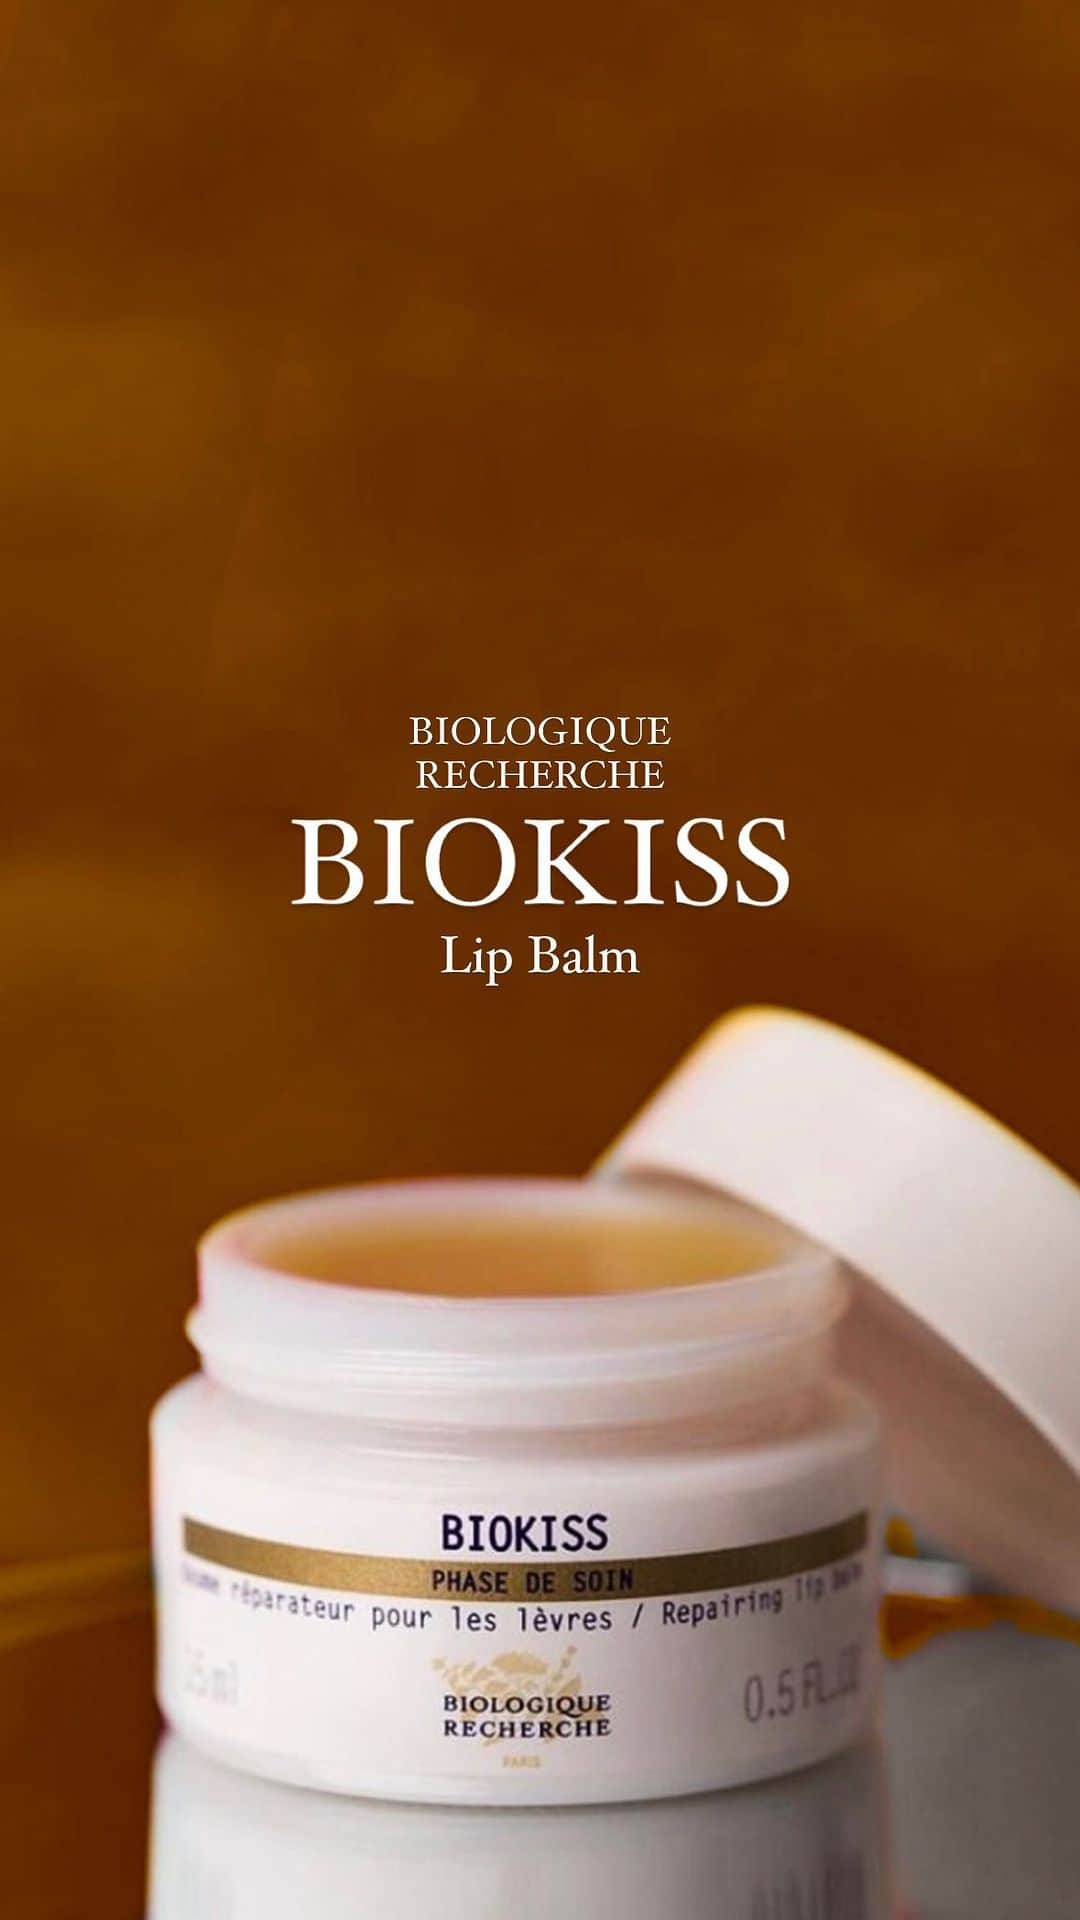 Biologique Recherche Iranのインスタグラム：「Biokiss is complete care for the most damaged lips.  Shea butter helps build a protective film on the surface, thereby preventing the water in the epidermis from evaporating, guaranteeing hydration. The product will leave your lips smoothed and soft while protecting them from external aggressions.  The active ingredients of this formula nourish the labial epidermis in-depth and reduce dehydration, wrinkles, fine lines and cracks.  With a rich, smooth and non-sticky texture it will protect, hydrate and repair lips.  Recommended for all skin conditions, especially those with rough, dehydrated and chapped lips. 🫦🫠✨ . #biokiss #biokissbiologiquerecherche #biologiquerechercheusa #biologiquerecherche #biologique_recherche #بیوکیس #بالم_لب #lipbalm #بیولوژیک_روشرش」